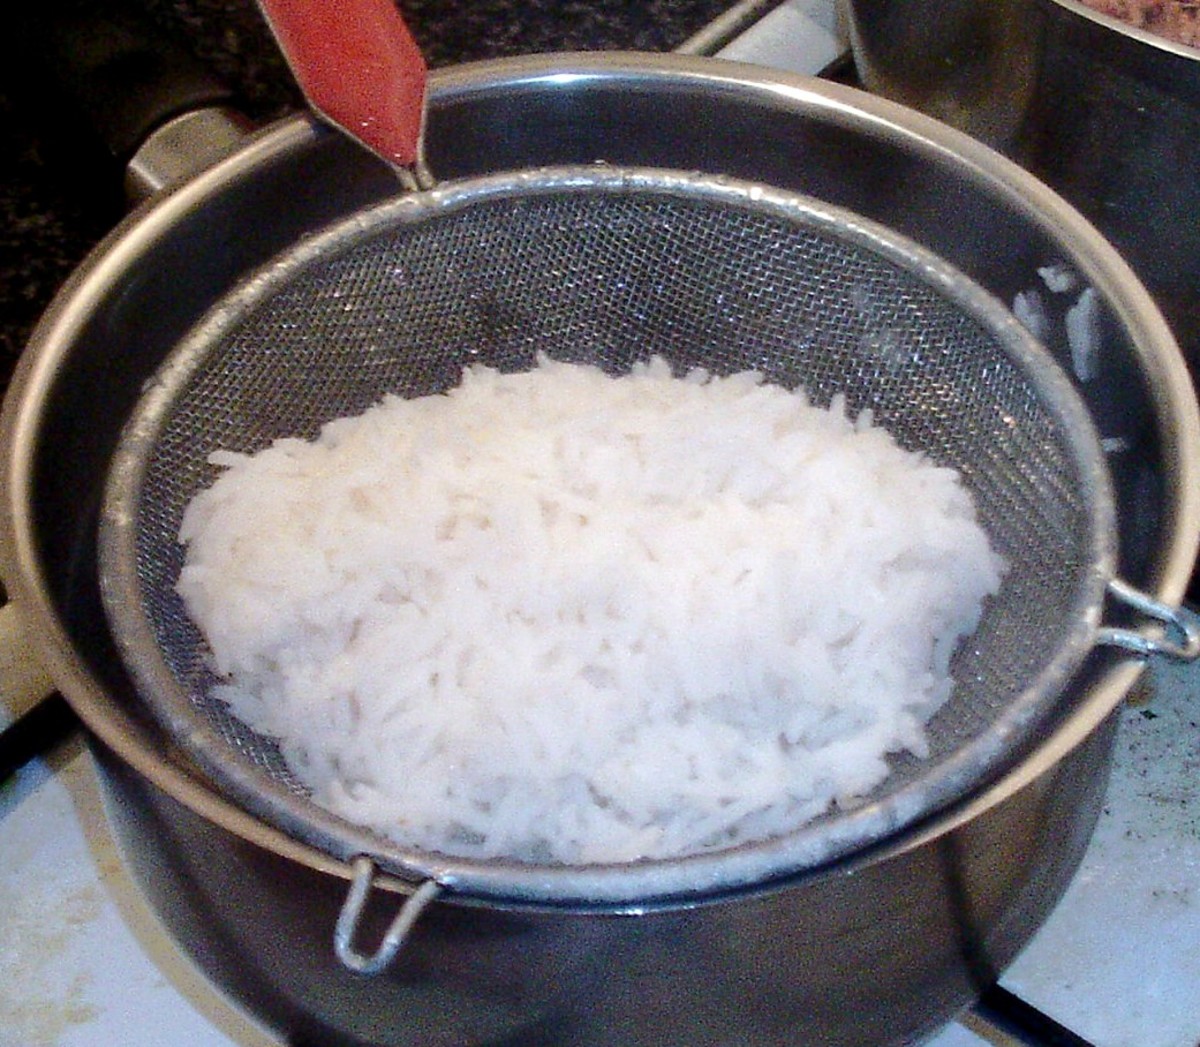 Rice is drained and left to steam off for a few minutes